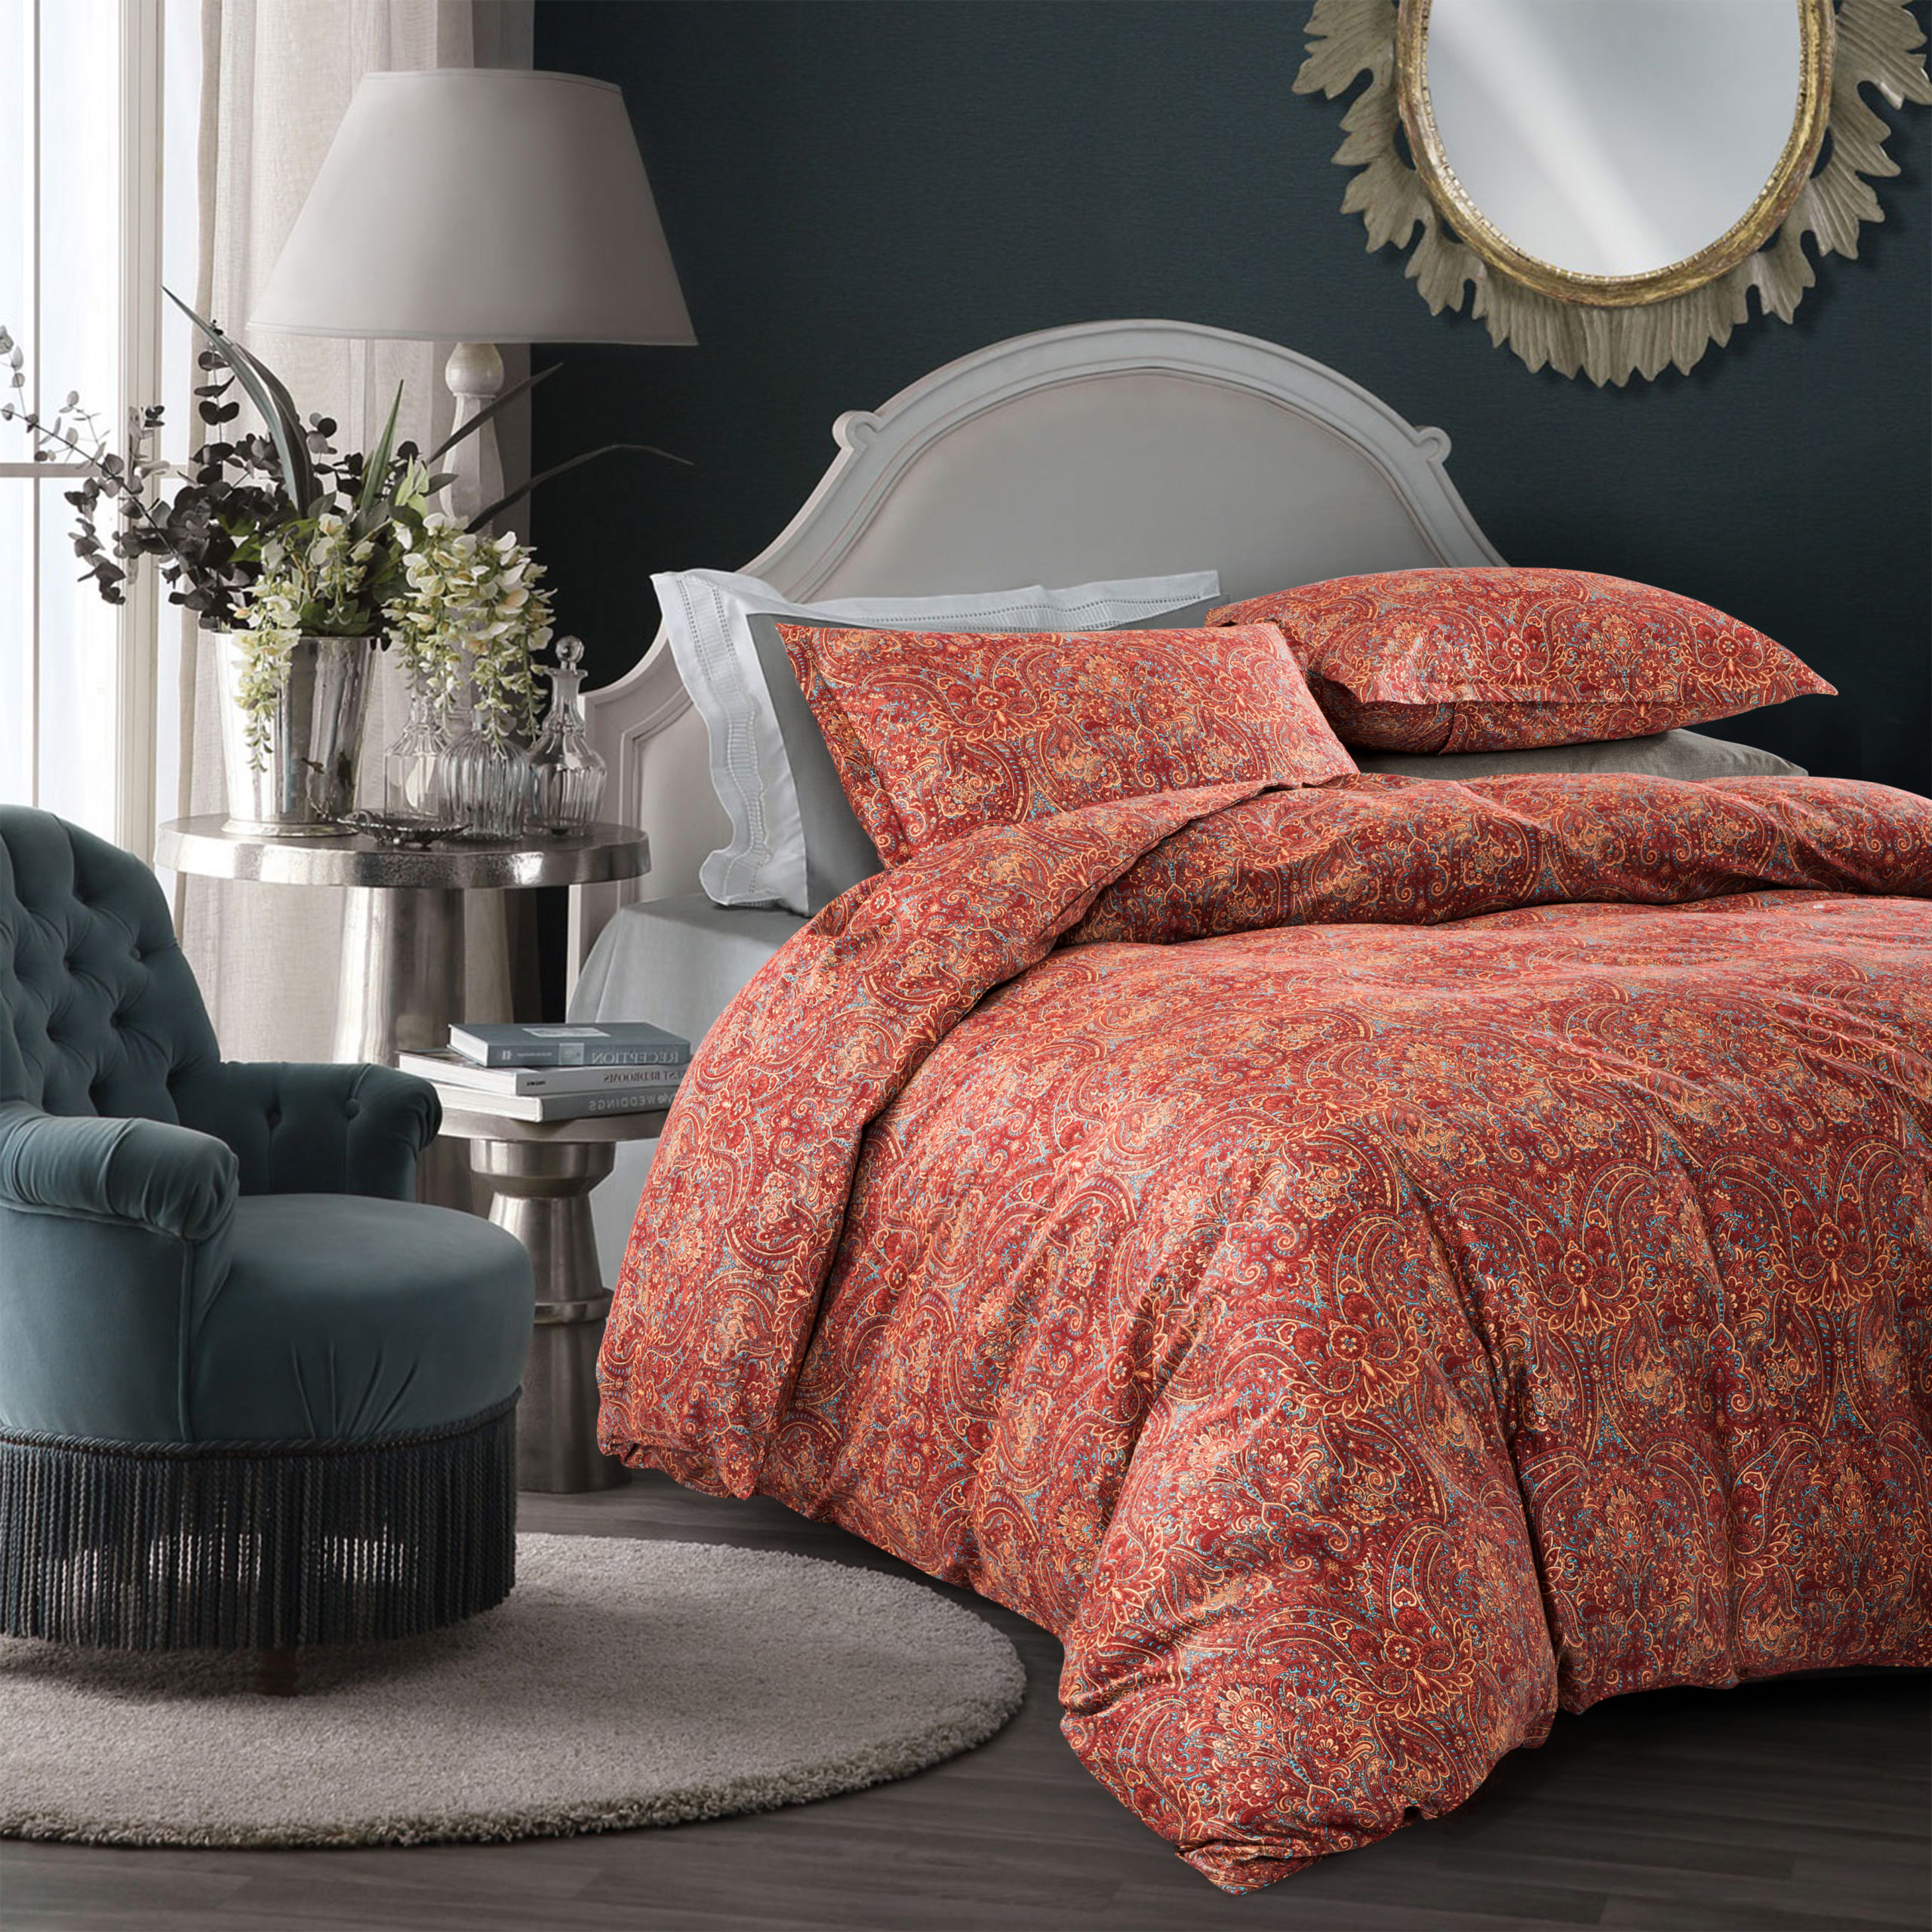 Boho Chic Traditional Paisley Design, Tapestry King Bedding